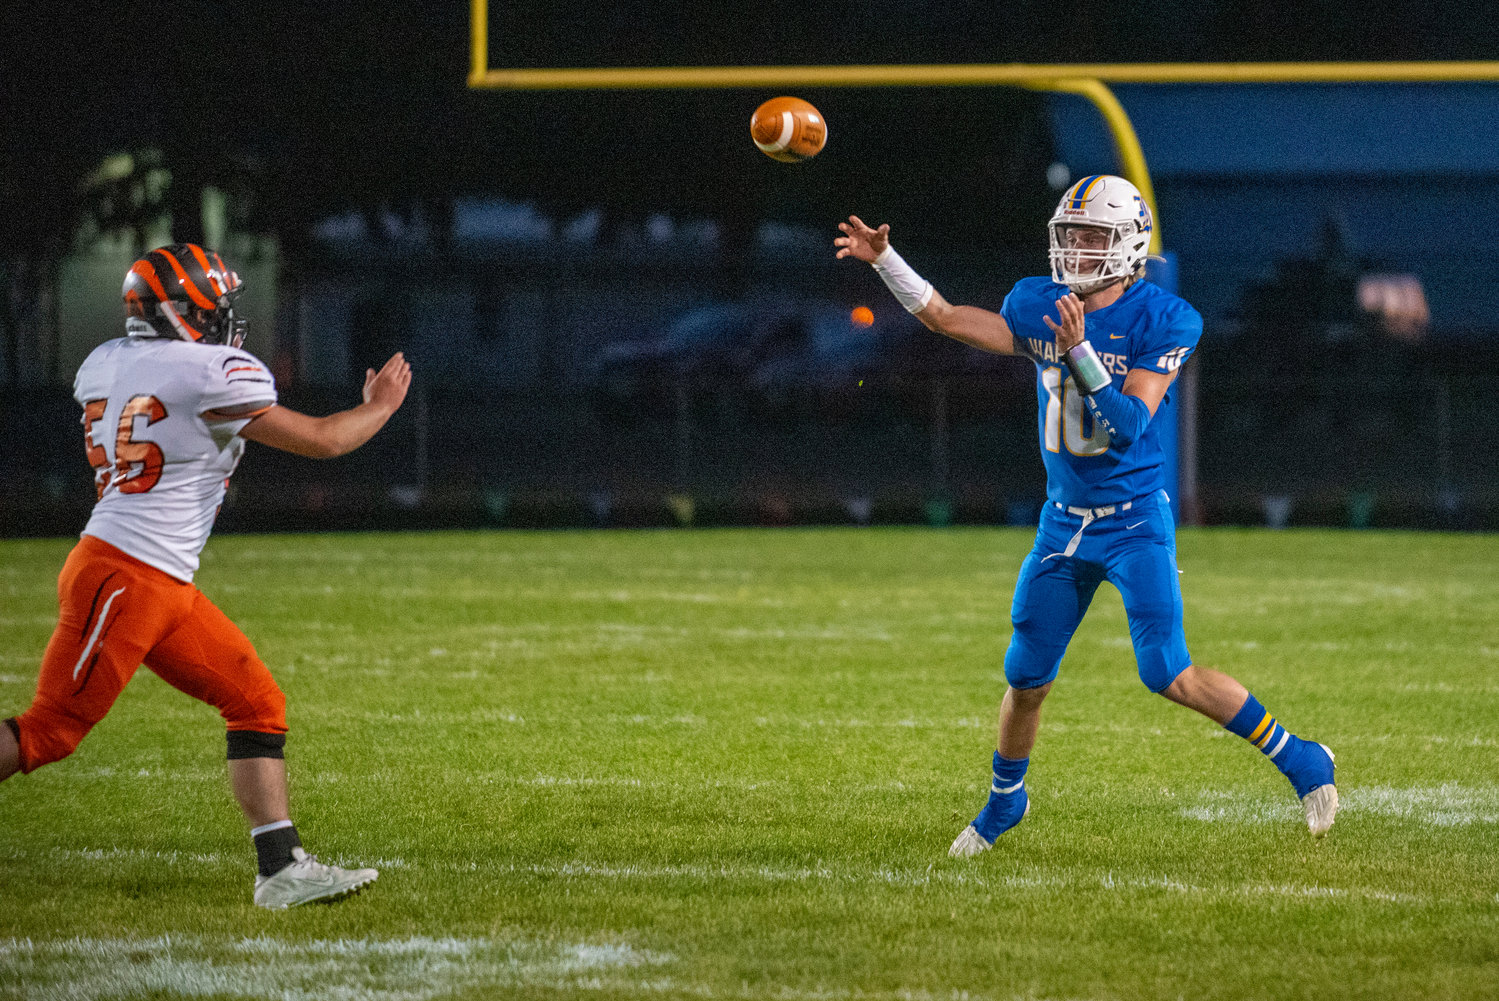 Rochester’s Landon Hawes (10) uncorks a throw before a Centralia lineman reaches him on Oct. 2, 2021.